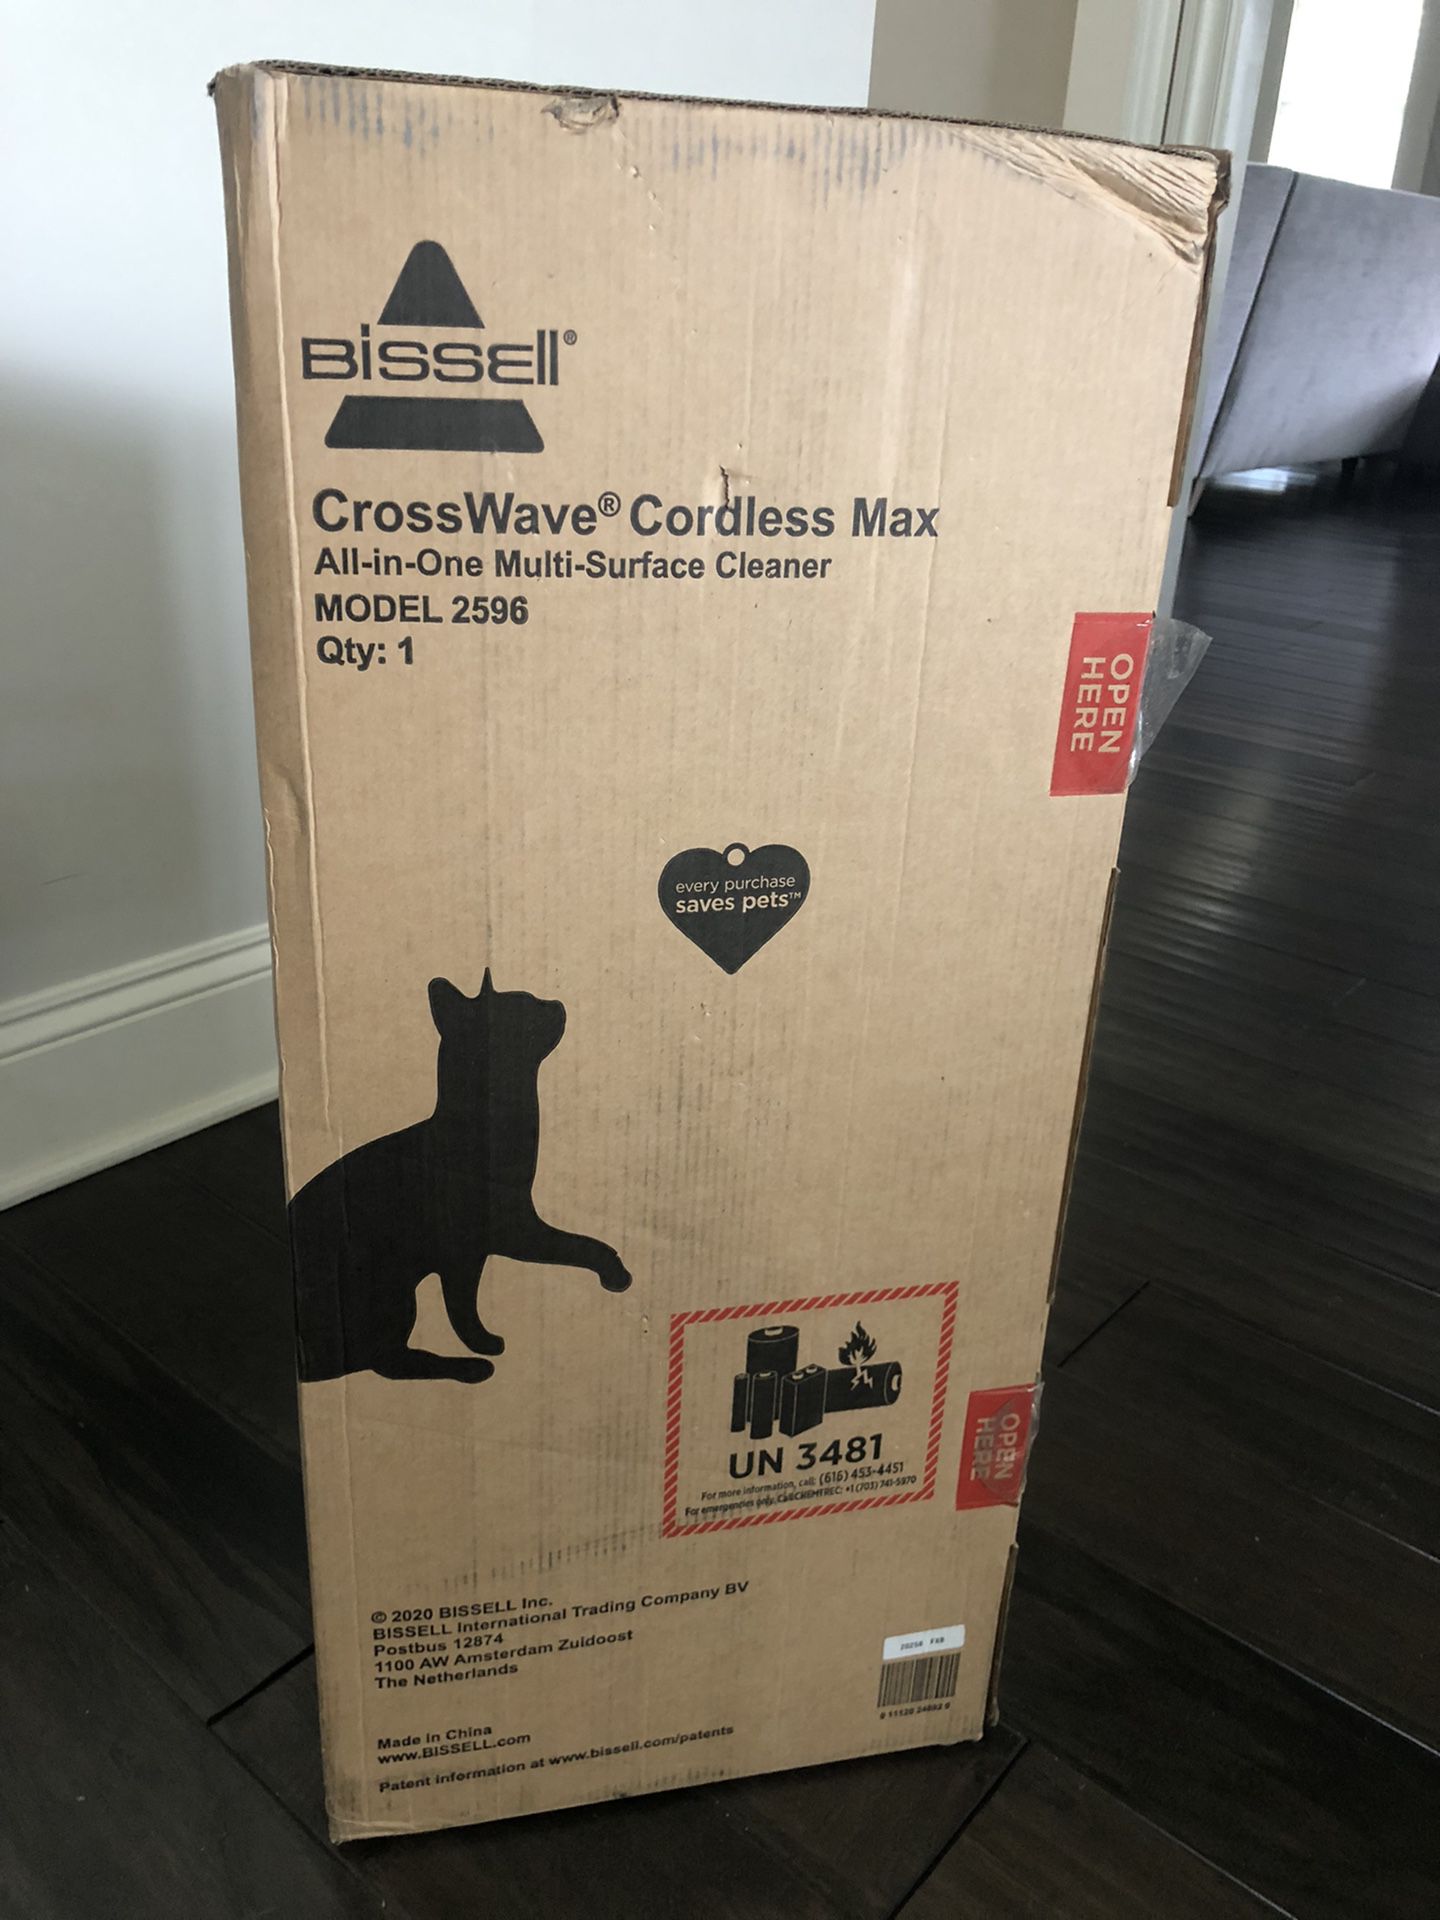 BRAND NEW IN BOX Bissell Cross Wave Multi Surface Steam Cordless Max - Brand New In Box